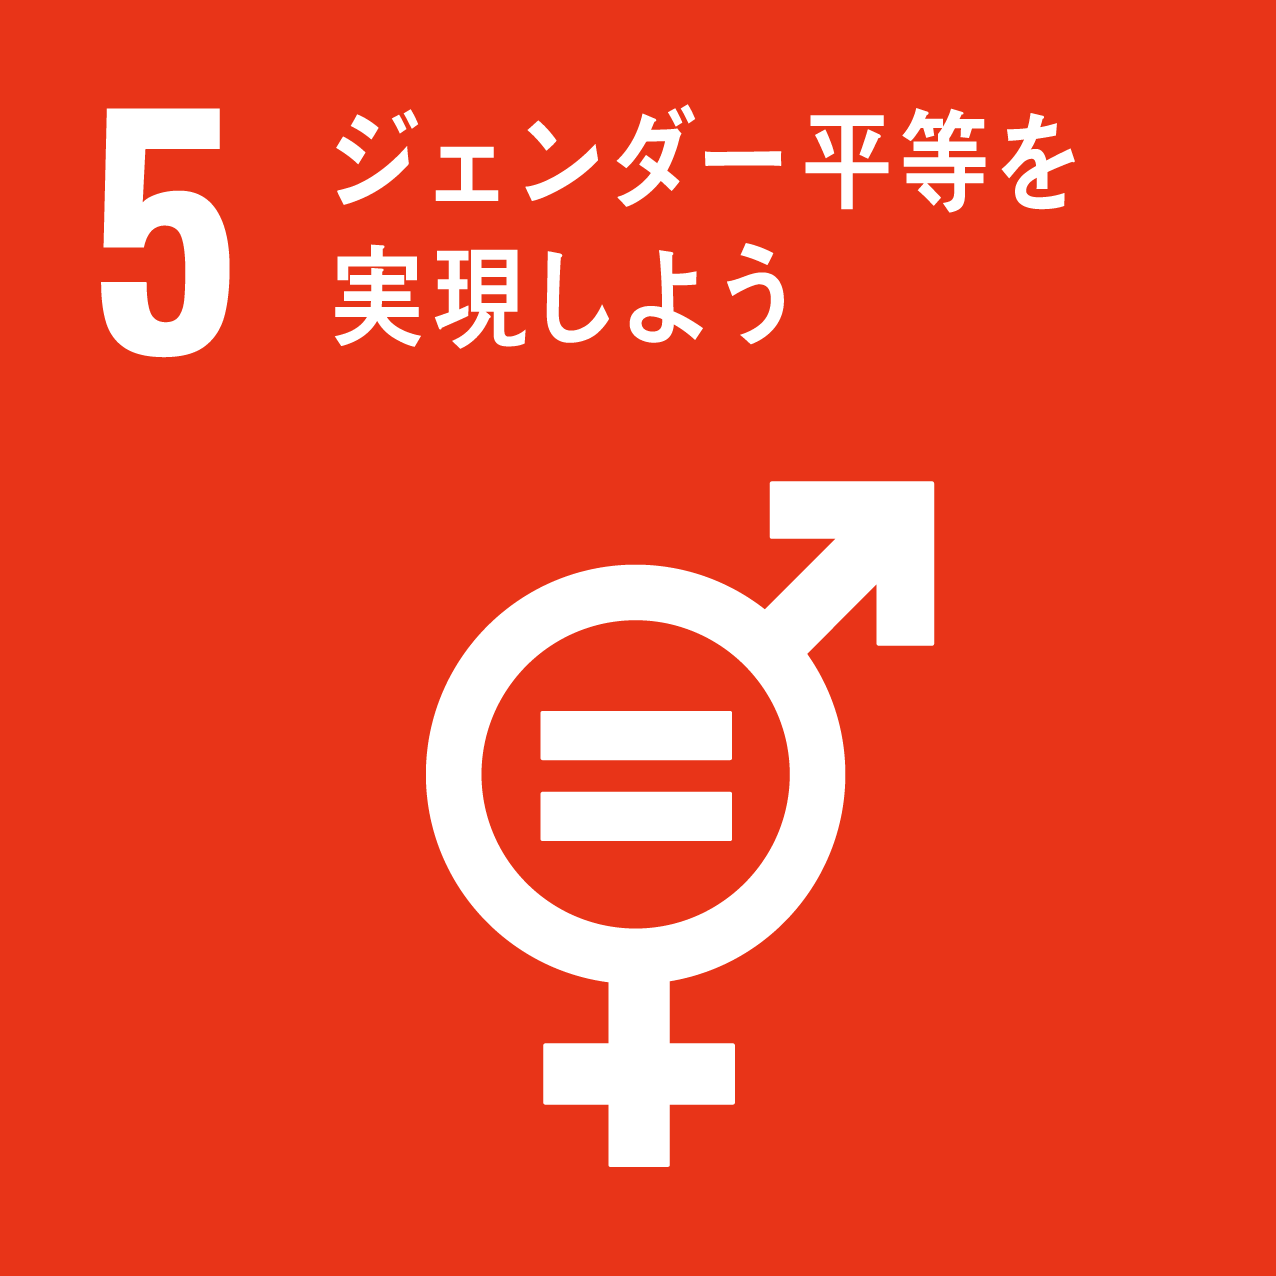 Let&#39;s achieve gender equality